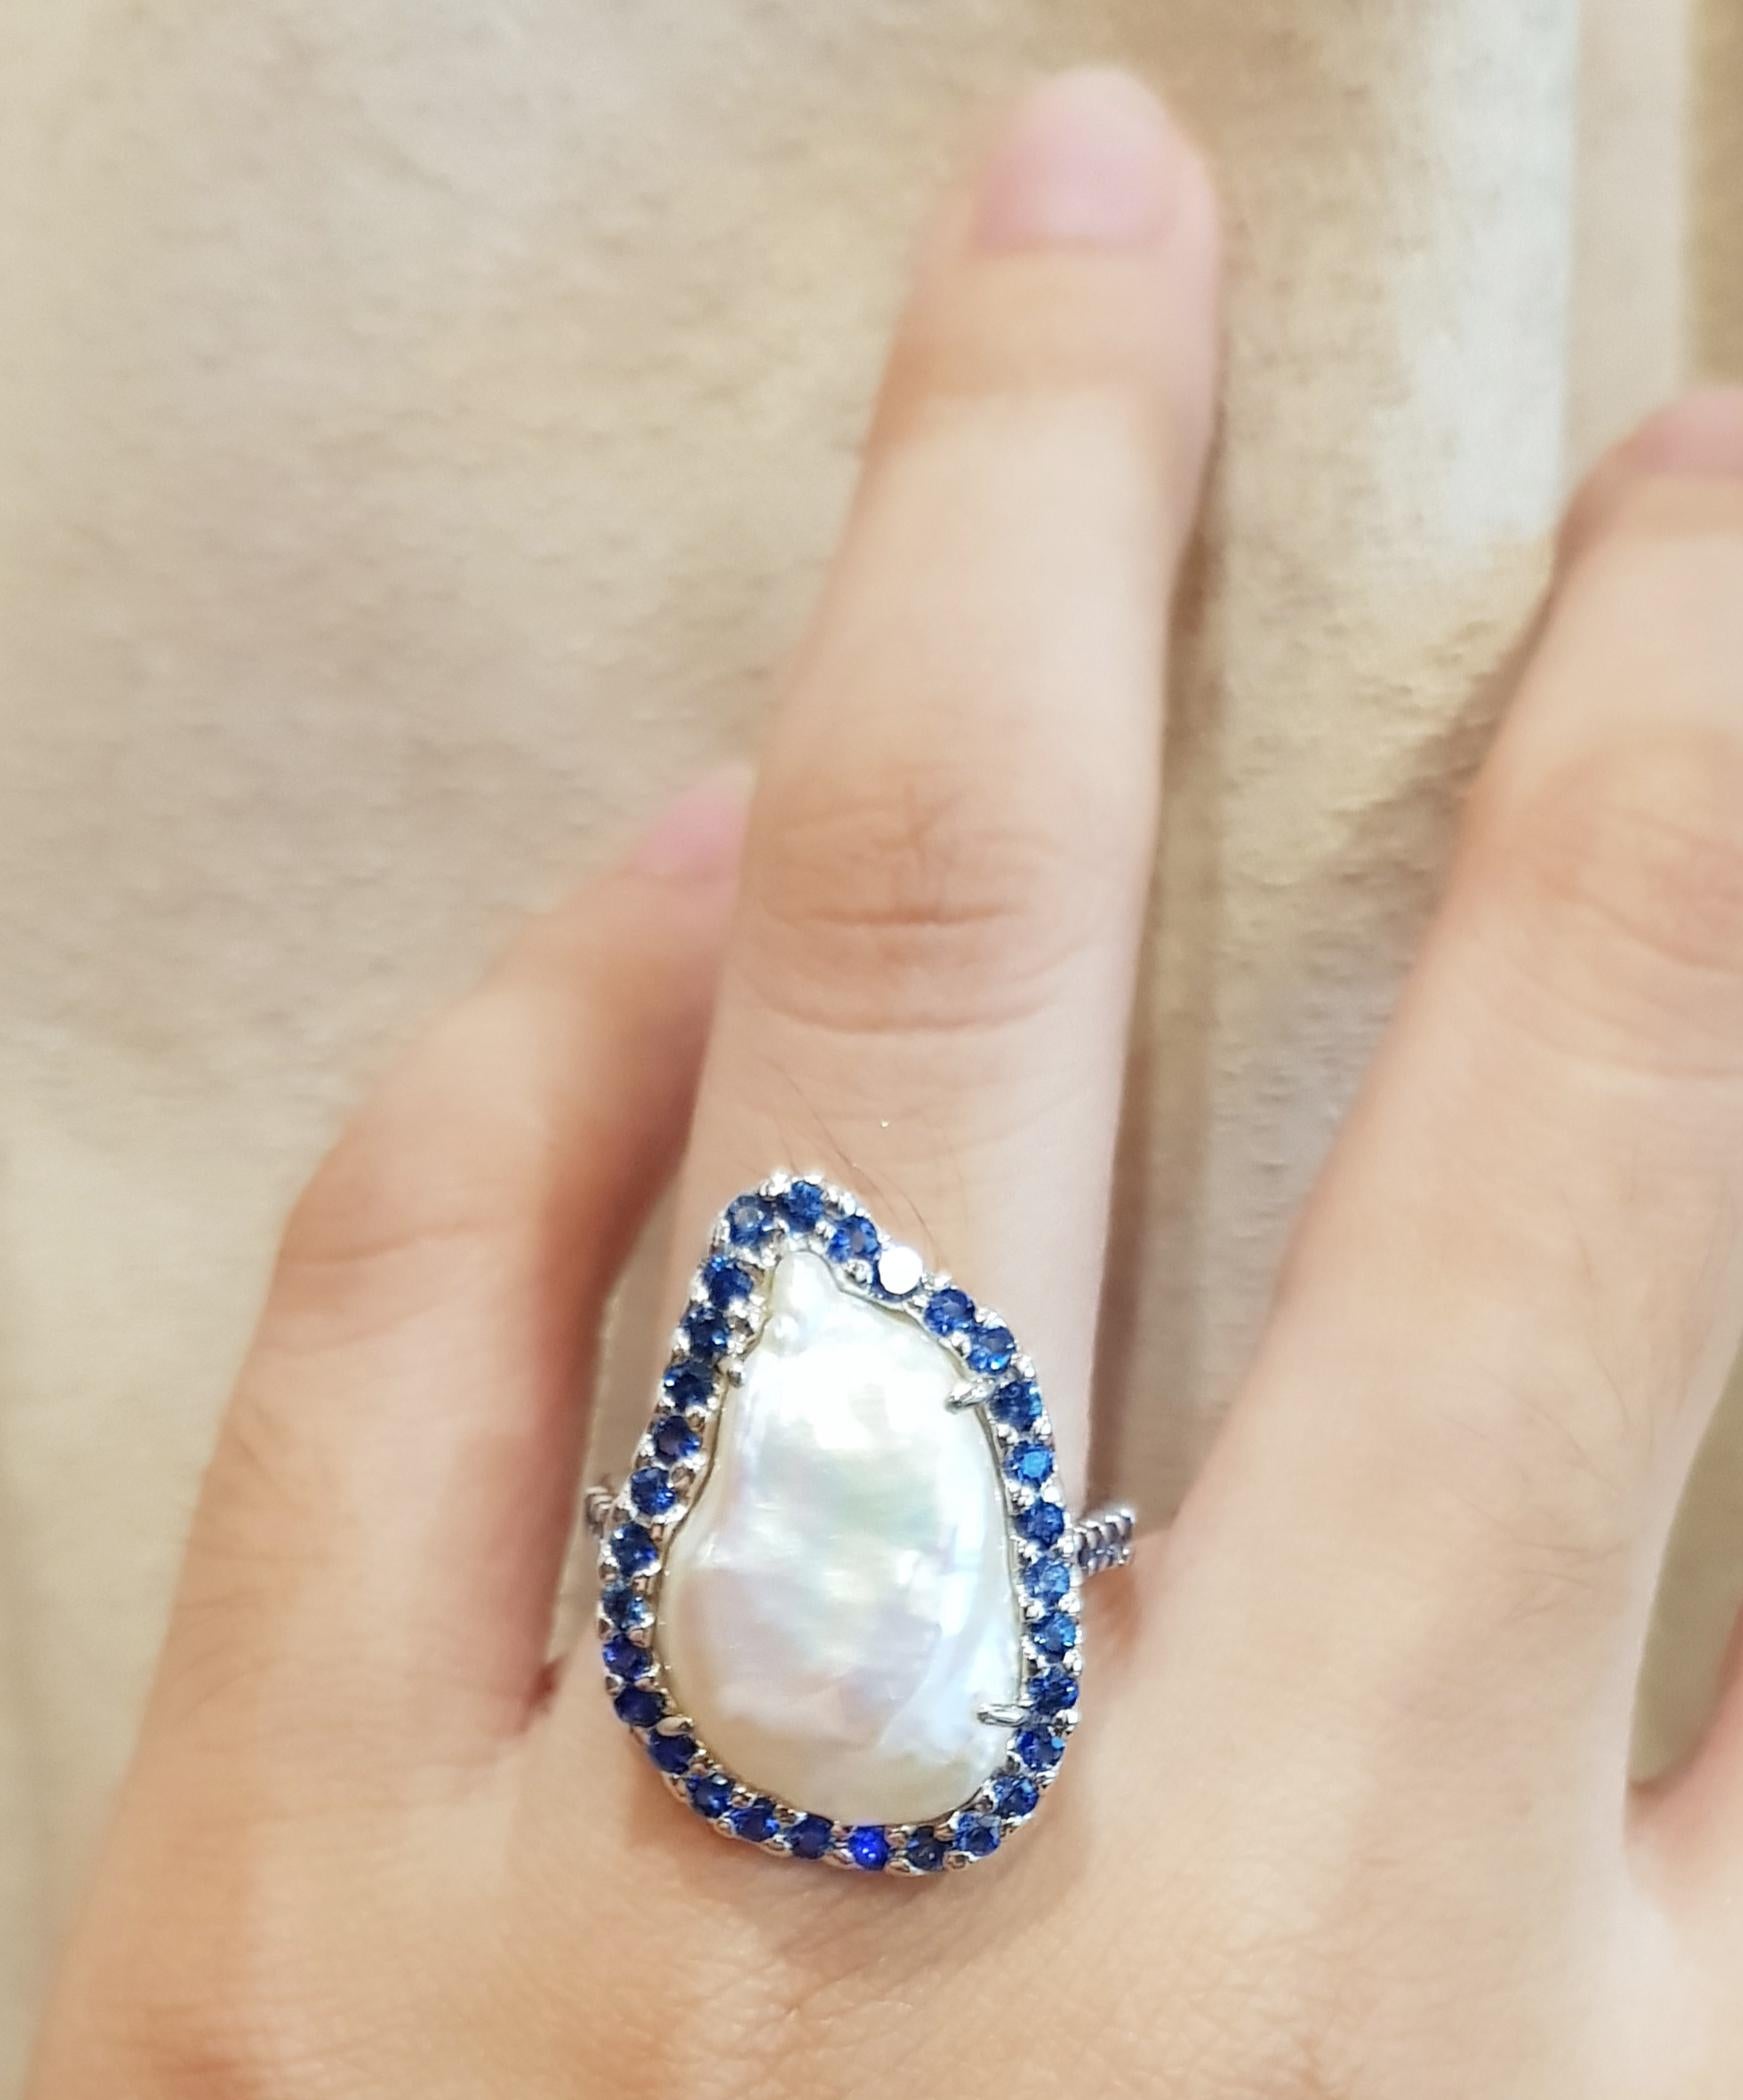 Fresh Water Pearl with Blue Sapphire 1.03 carats Ring in 18 karat White Gold Settings

Width:  1.8 cm 
Length: 2.3 cm
Ring Size: 53
Total Weight: 7.98 grams

